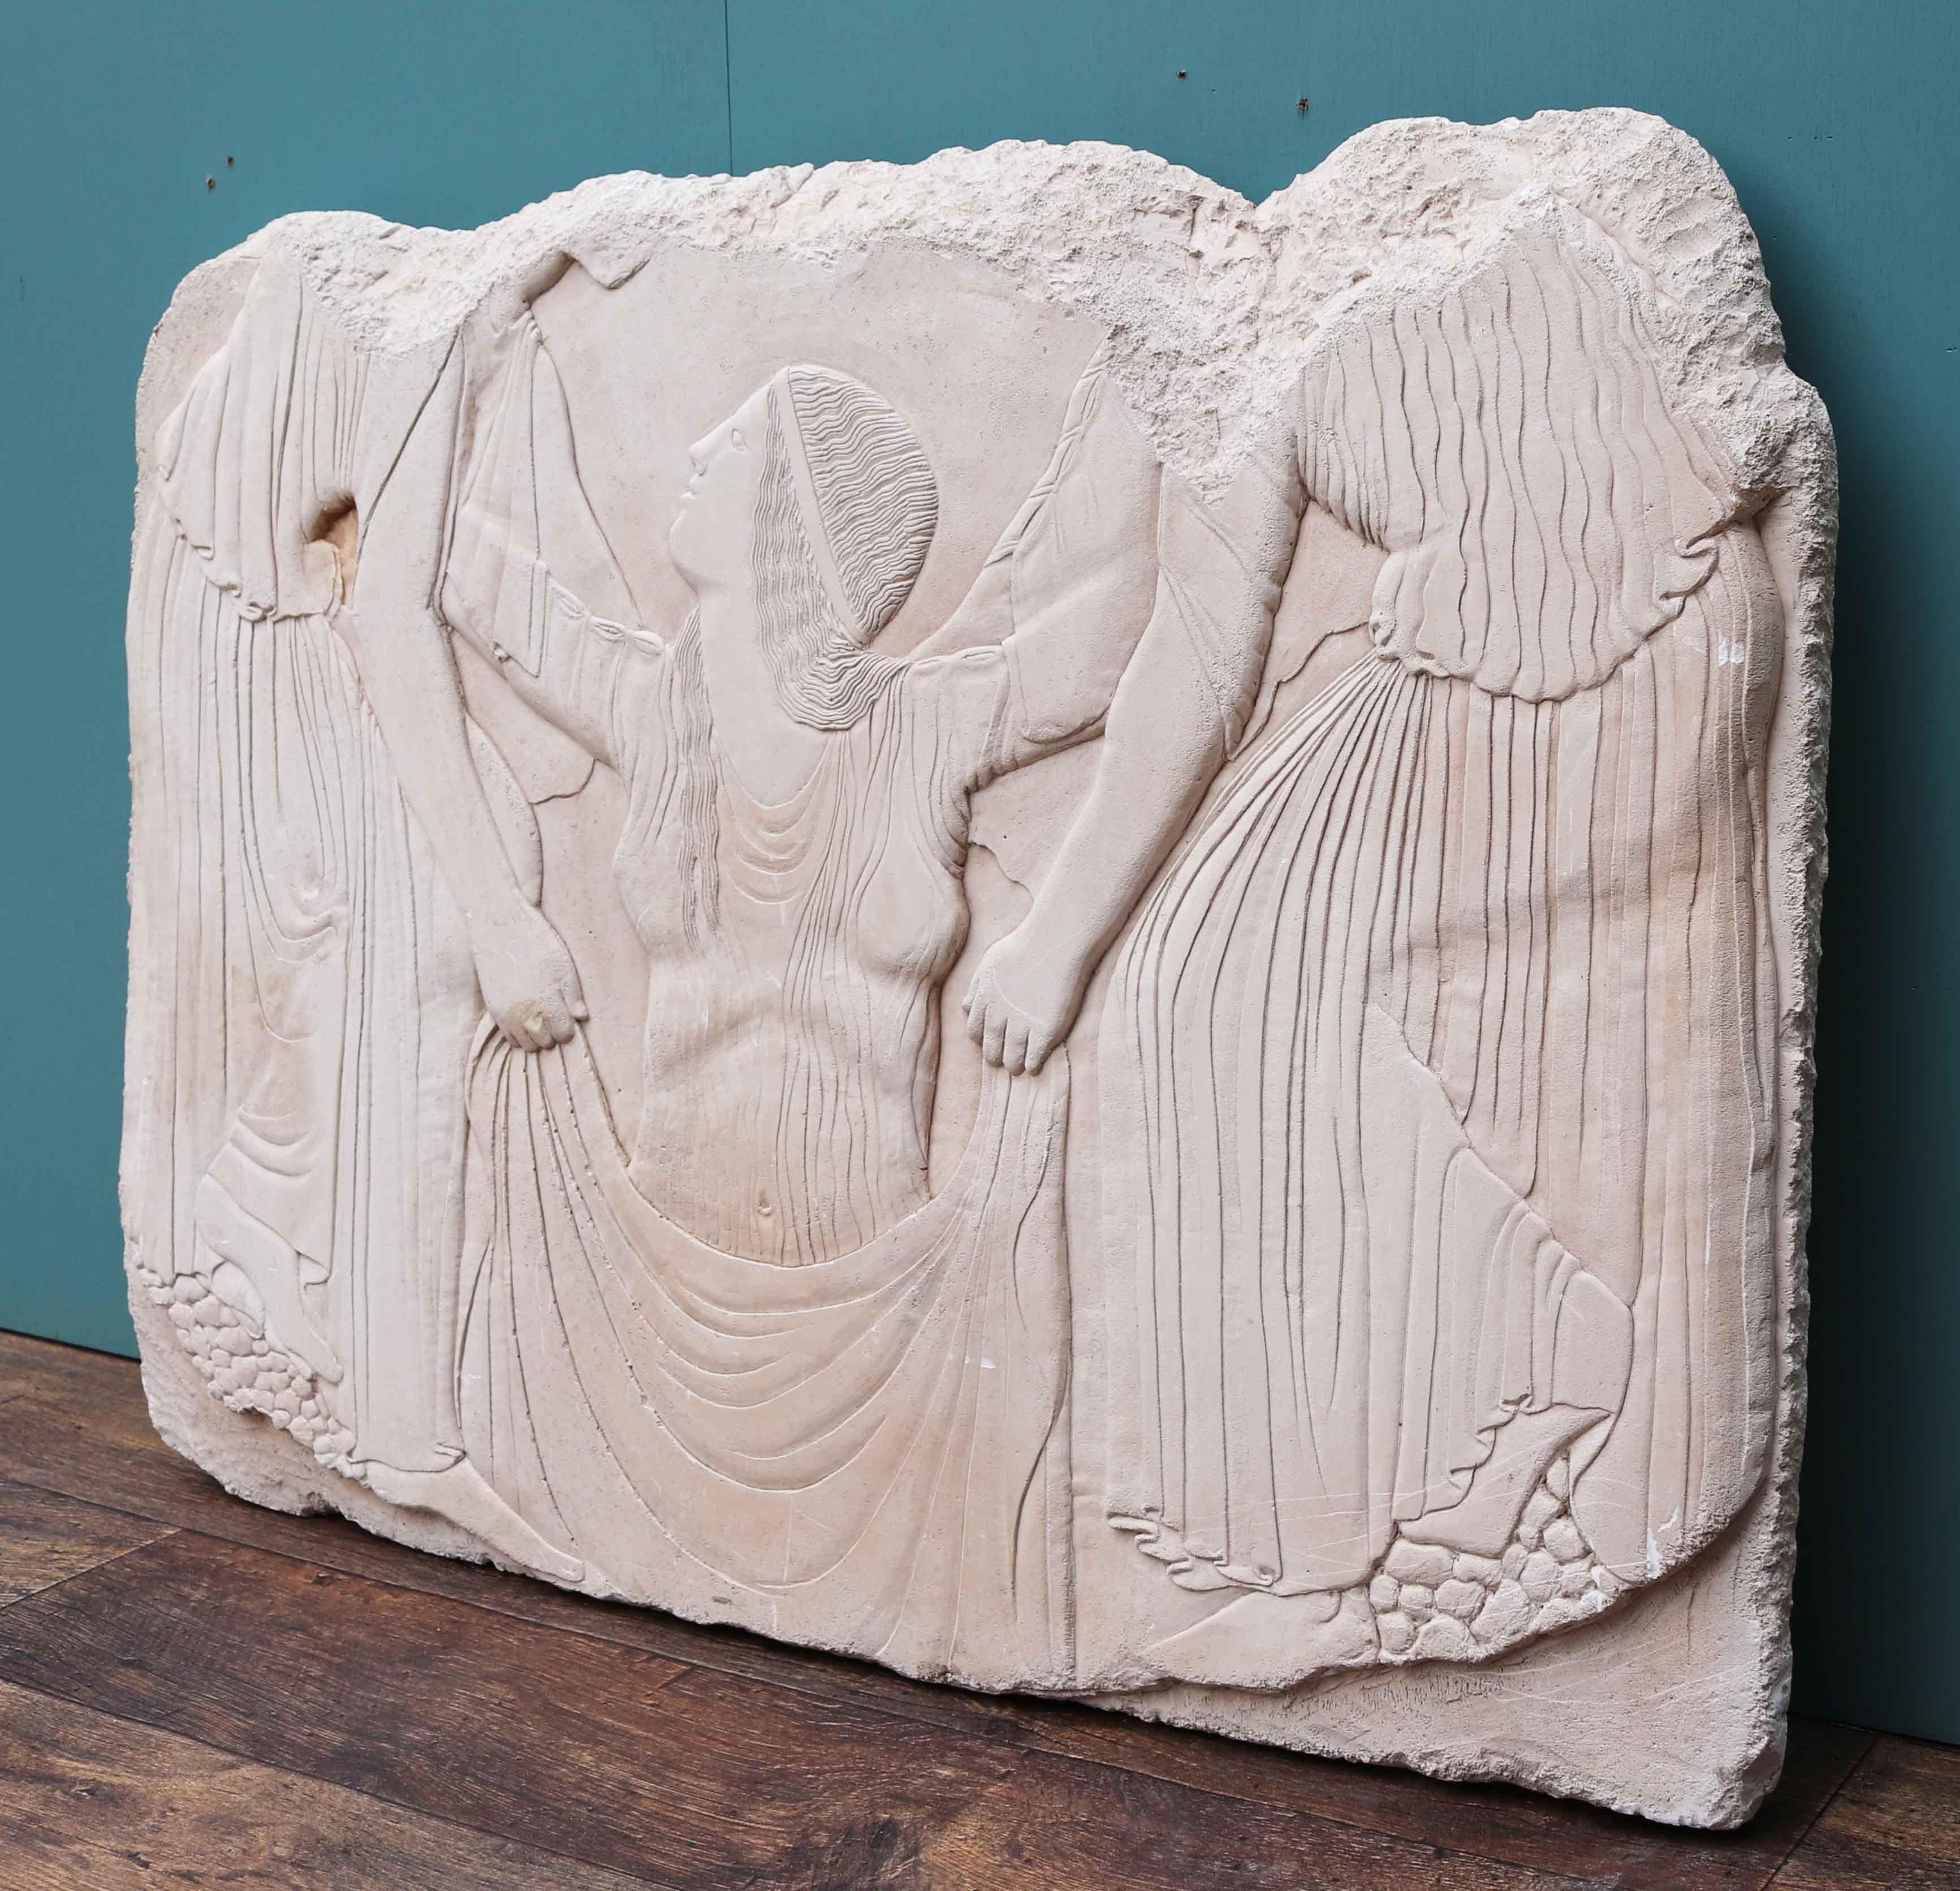 A well executed plaster wall plaque depicting a classical scene in the style of an ancient frieze fragment. Believed French in origin.

So-called “Ludovisi Throne” main panel, Aphrodite attended by two handmaidens as she rises out the surf. The